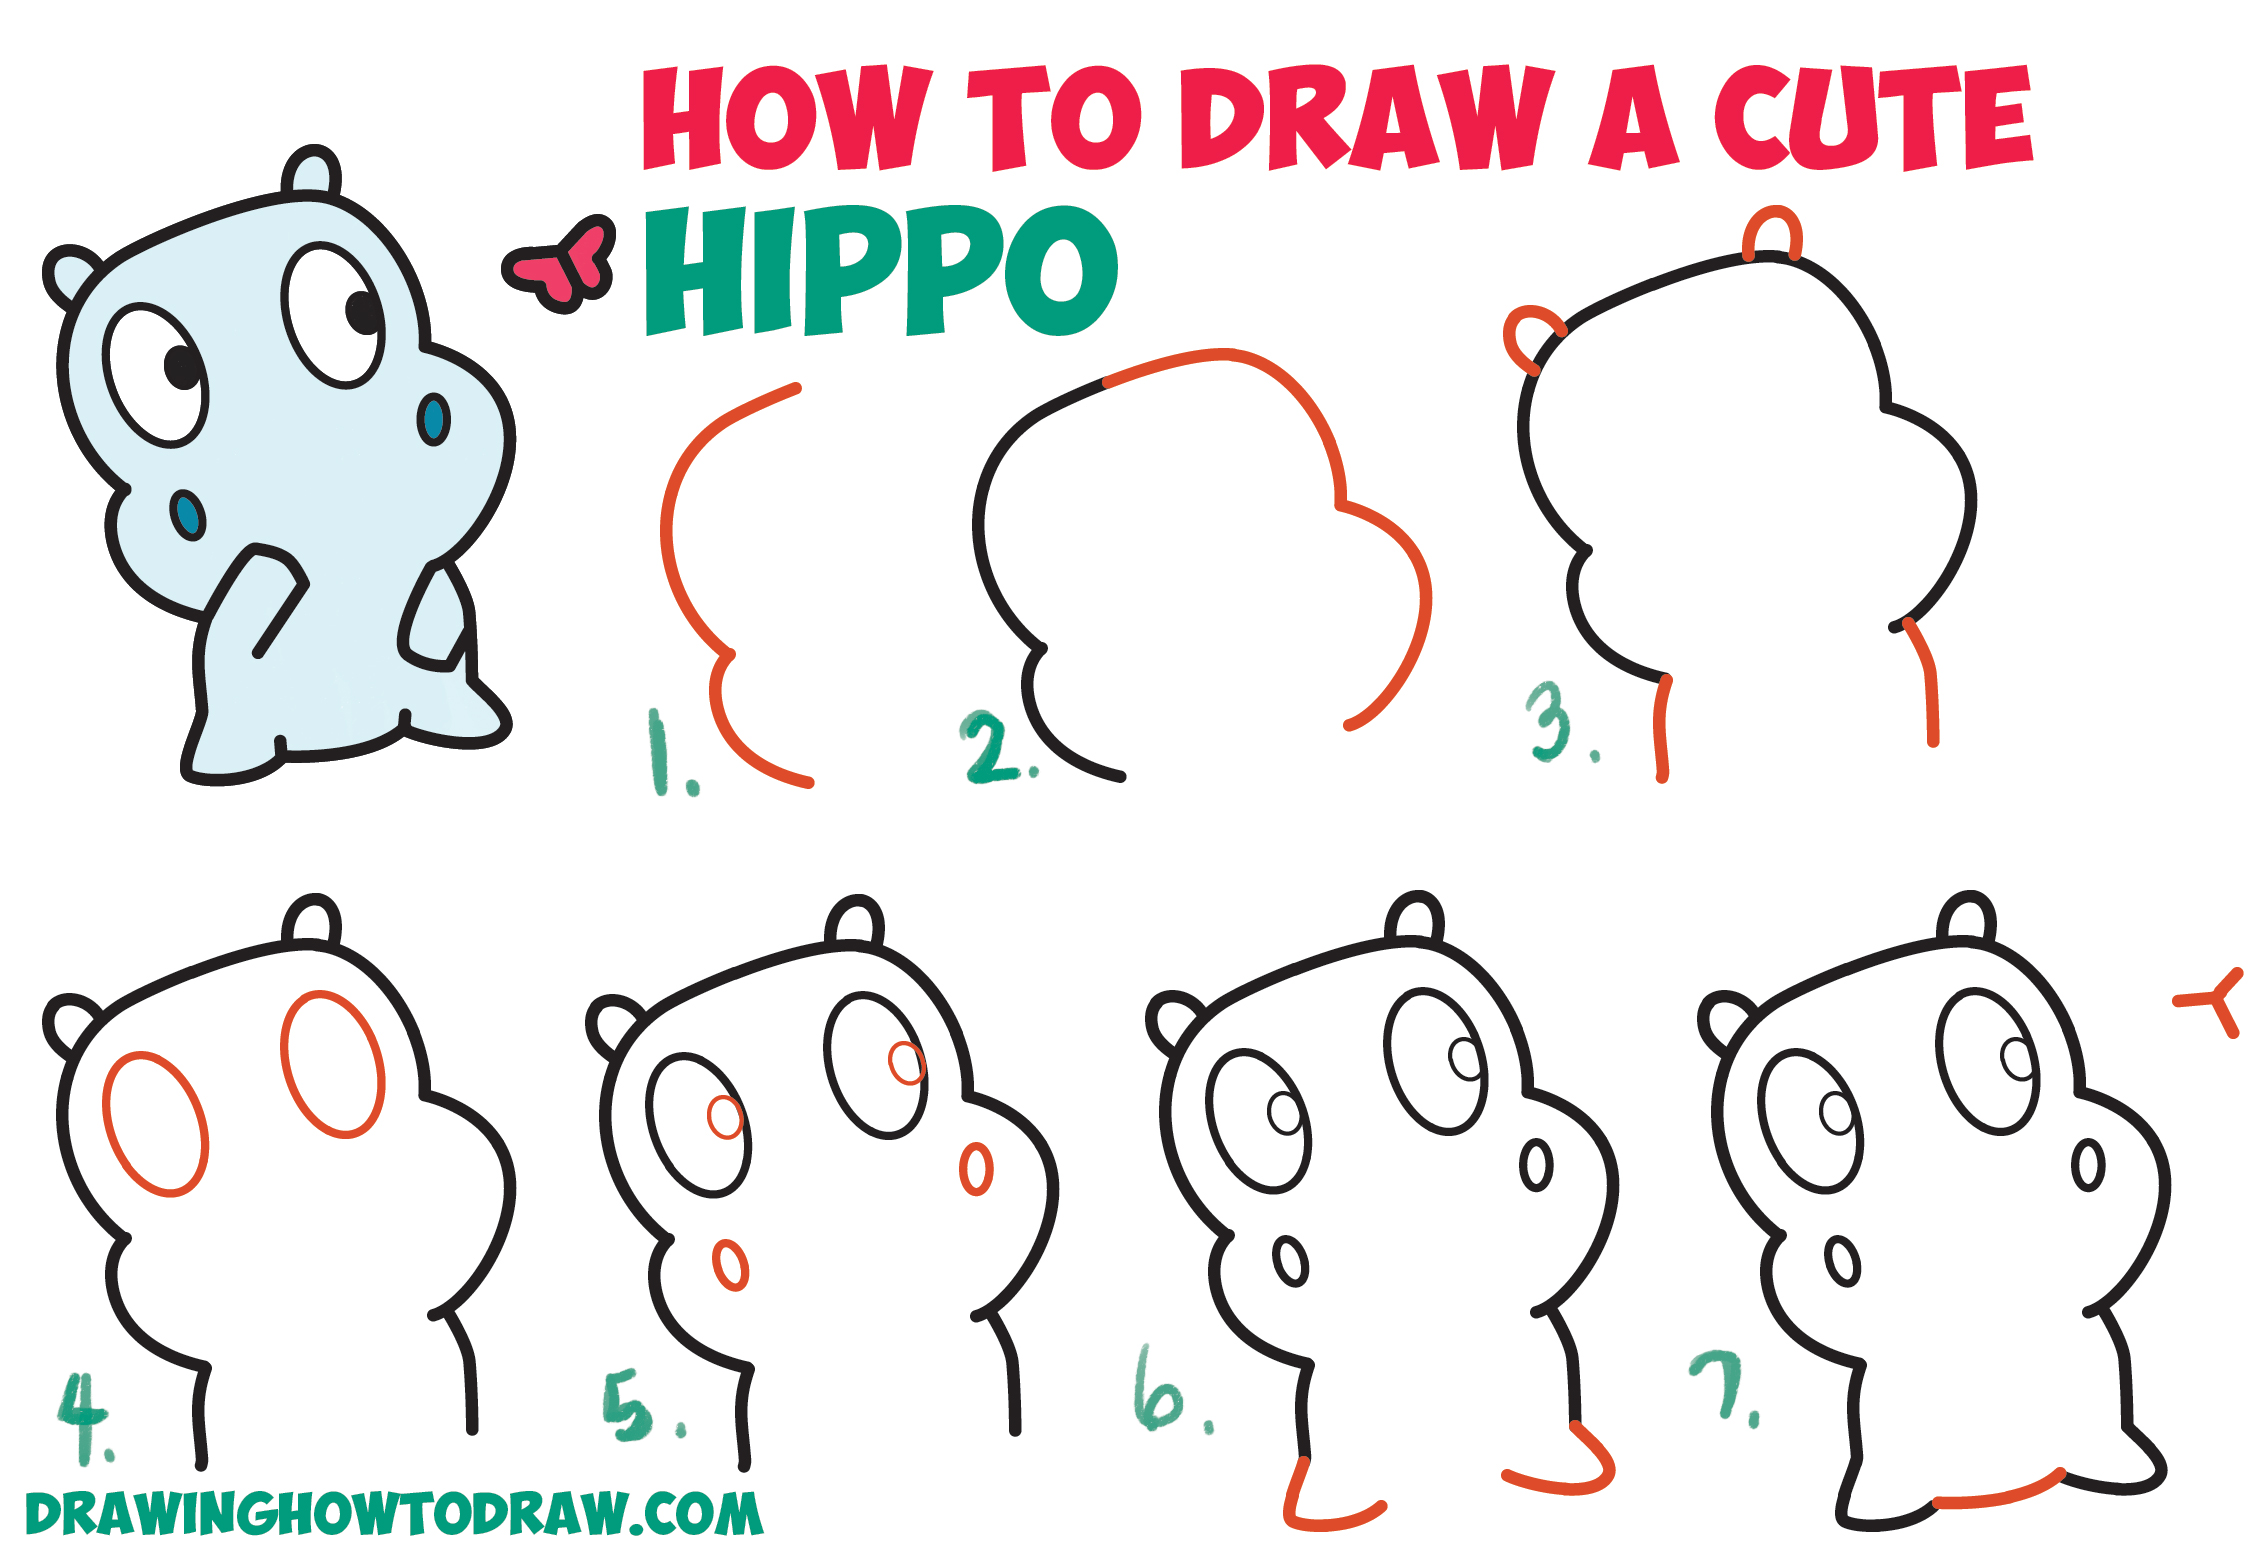 How To Draw A Cute Cartoon Baby Hippo And Butterfly Easy Step By Step Drawing Tutorial For Kids Beginners How To Draw Step By Step Drawing Tutorials